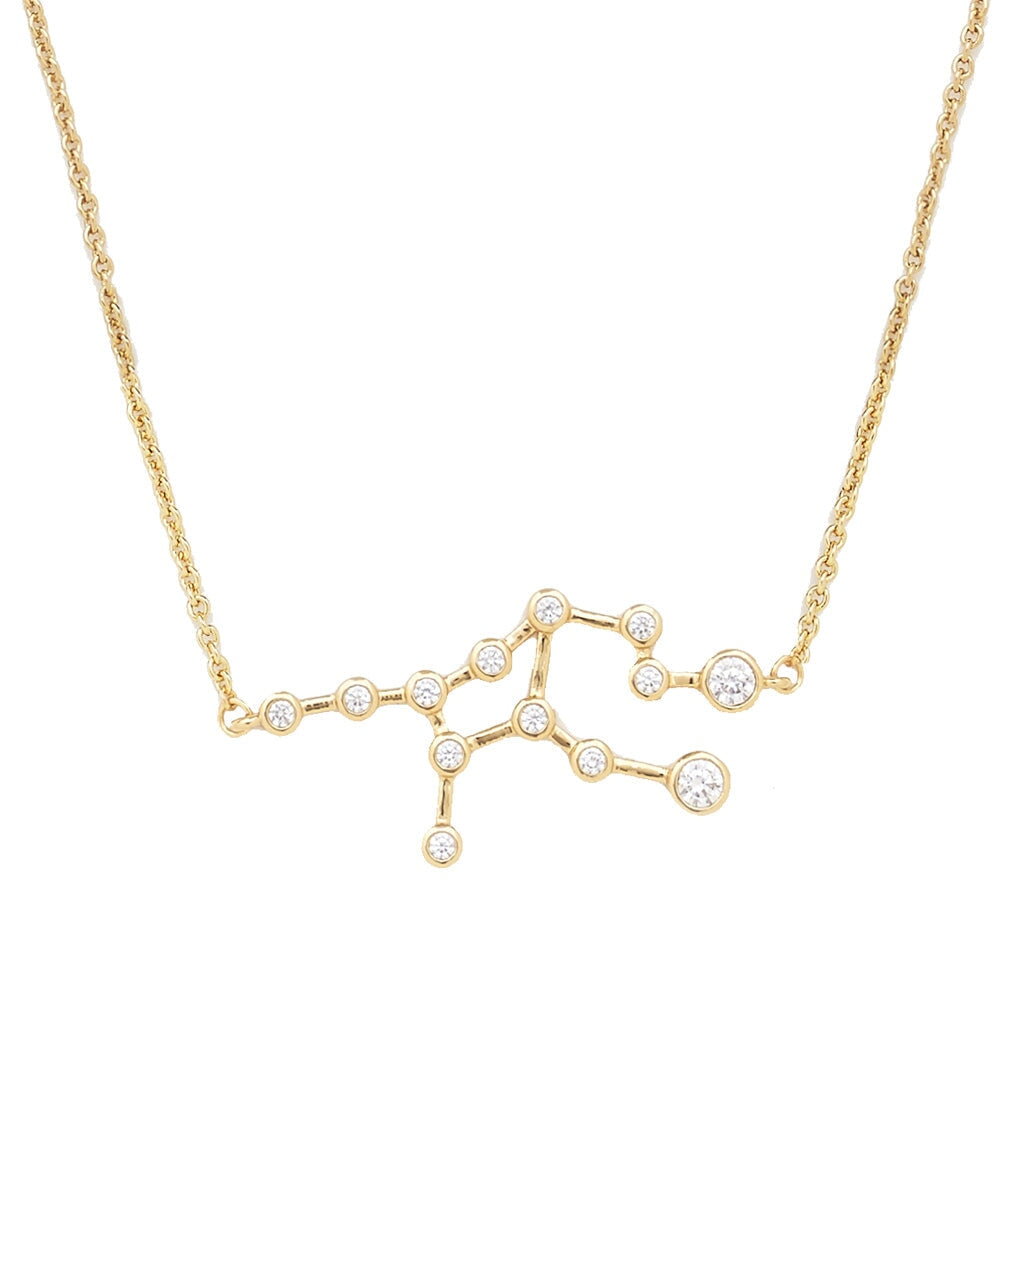 'When Stars Align' Constellation Necklace Necklace Sterling Forever Gold Virgo (Aug 23 - Sept 22) 